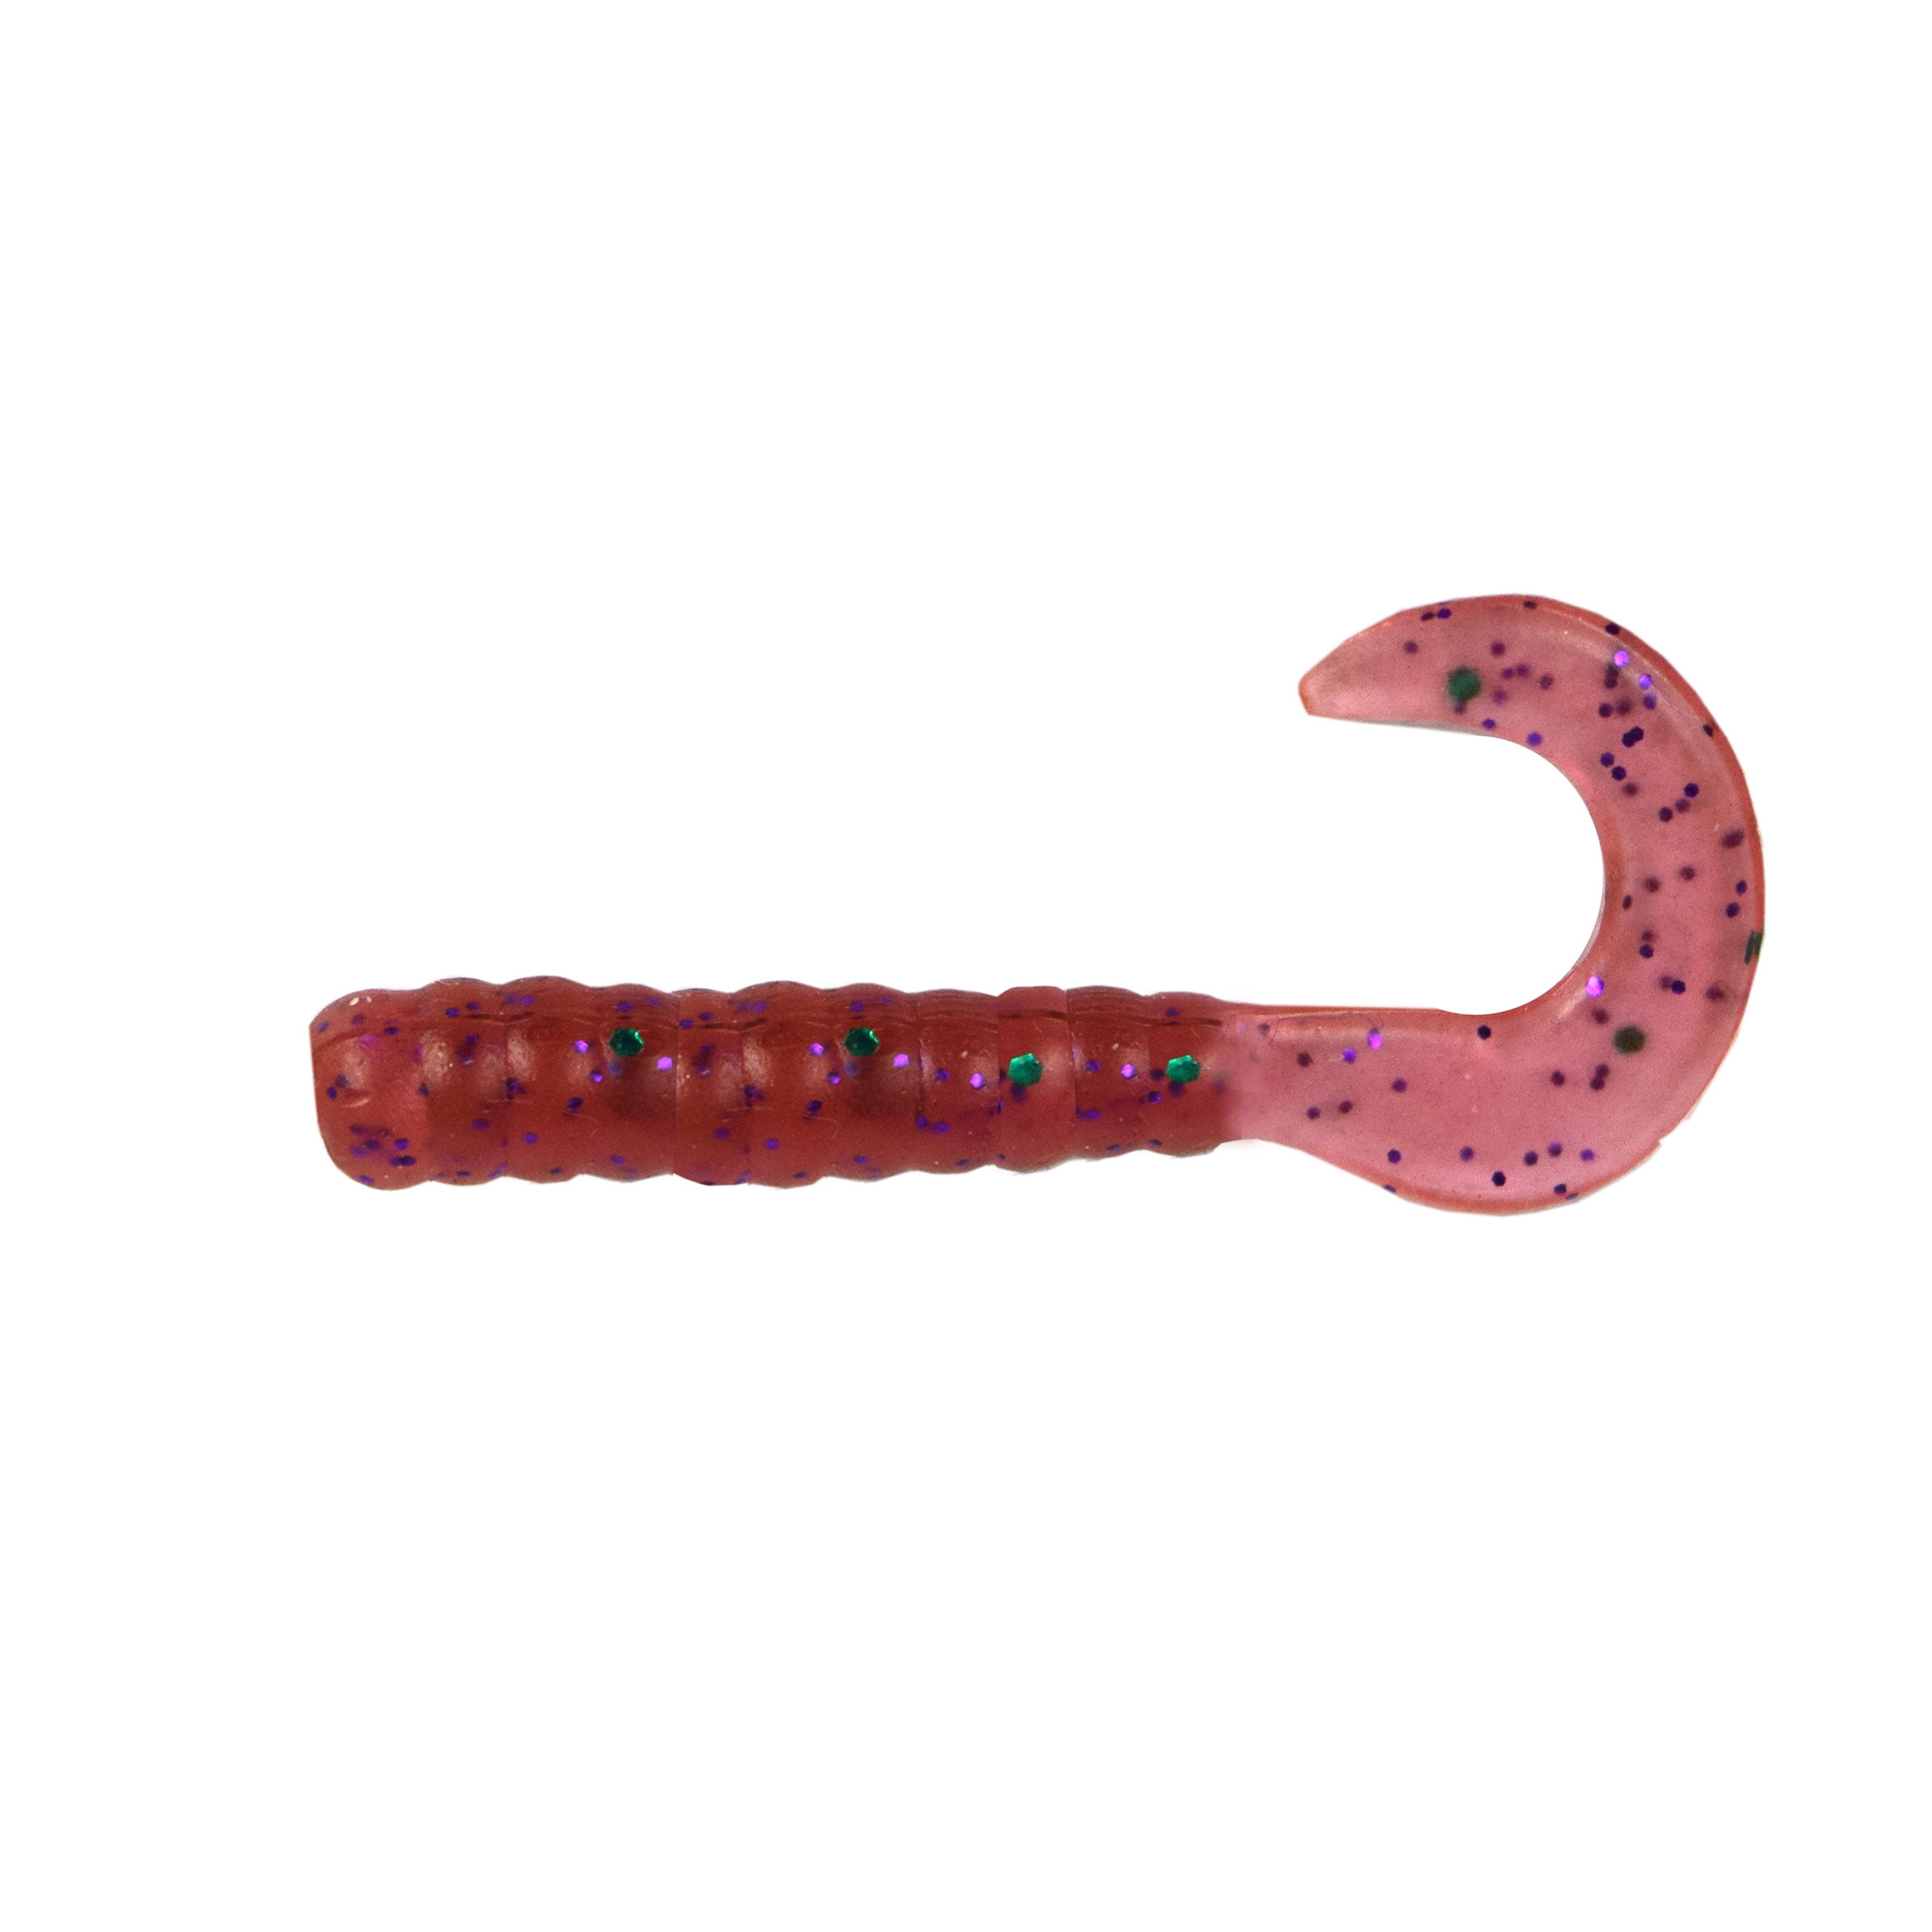 Tackle HD 70-Pack Grub Fishing Lures, 3-Inch Skirted Grub with Curly Tail,  Bulk Fishing Grubs for Crappie, Bass, Walleye, or Trout Bait, Freshwater or  Saltwater Swimbait, Black 